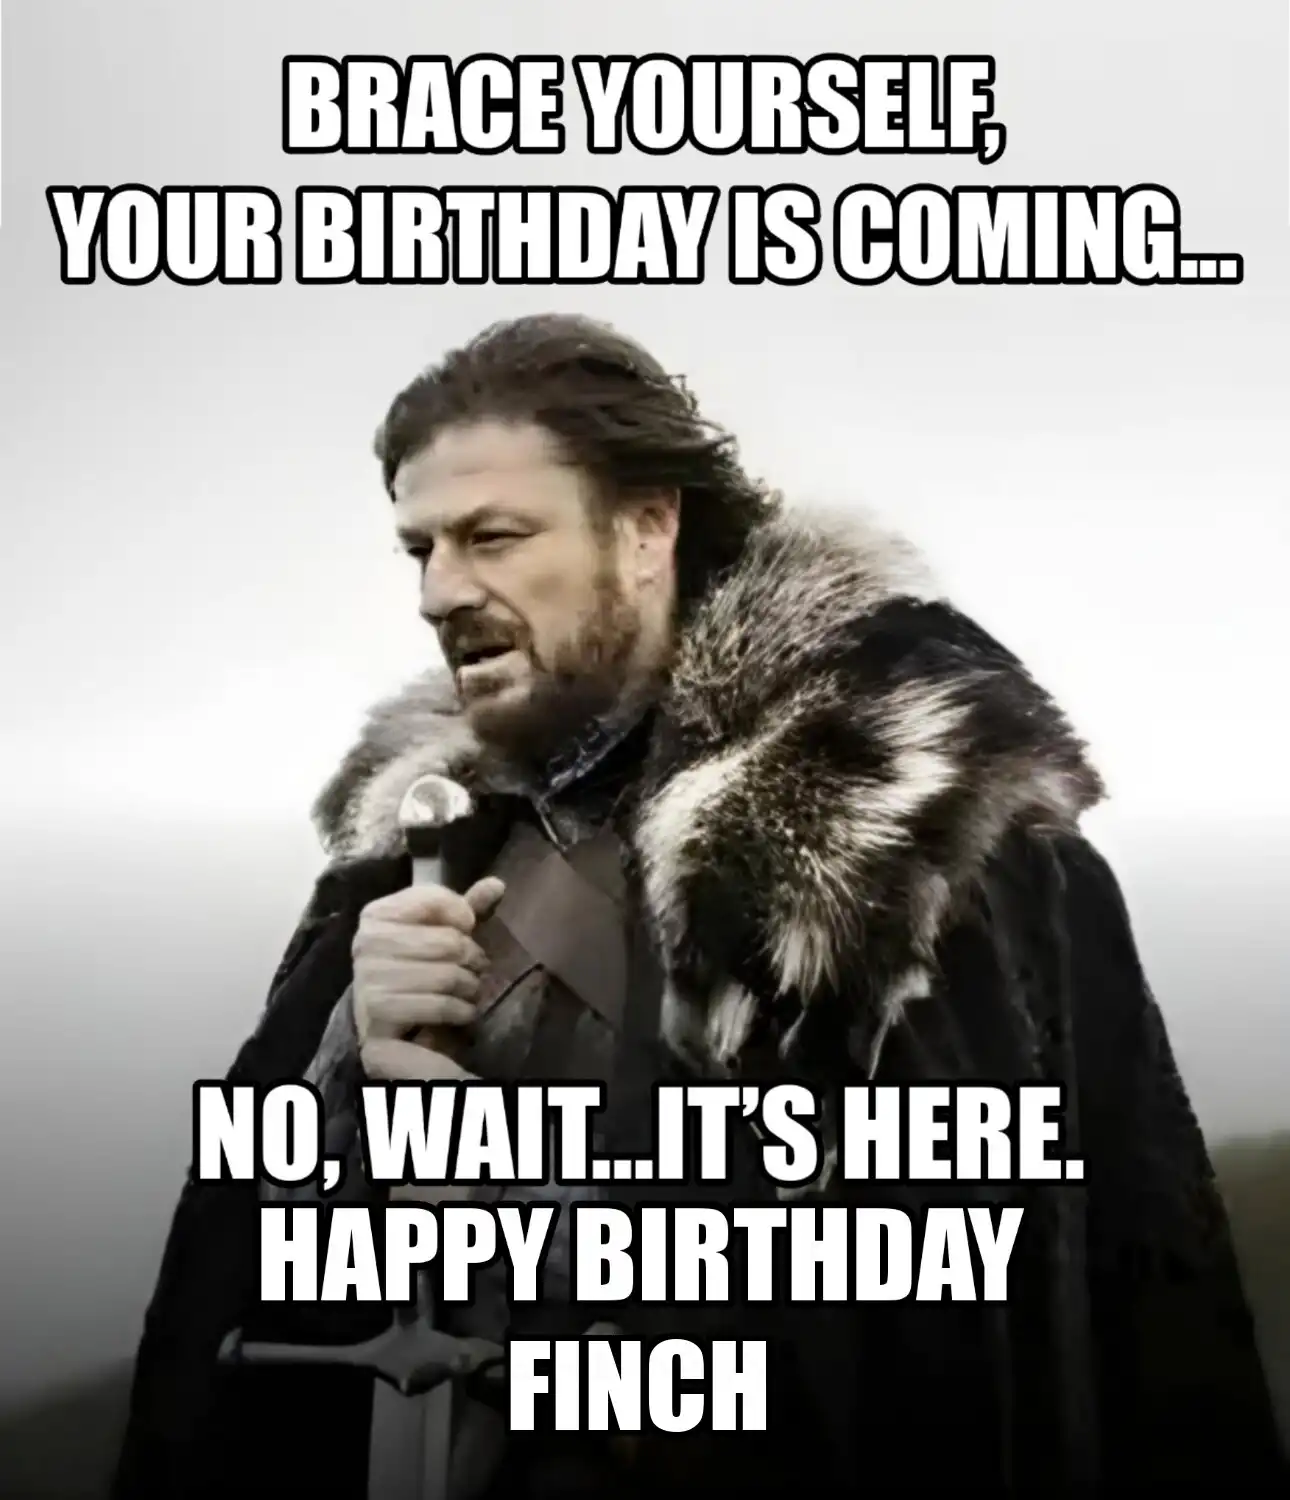 Happy Birthday Finch Brace Yourself Your Birthday Is Coming Meme